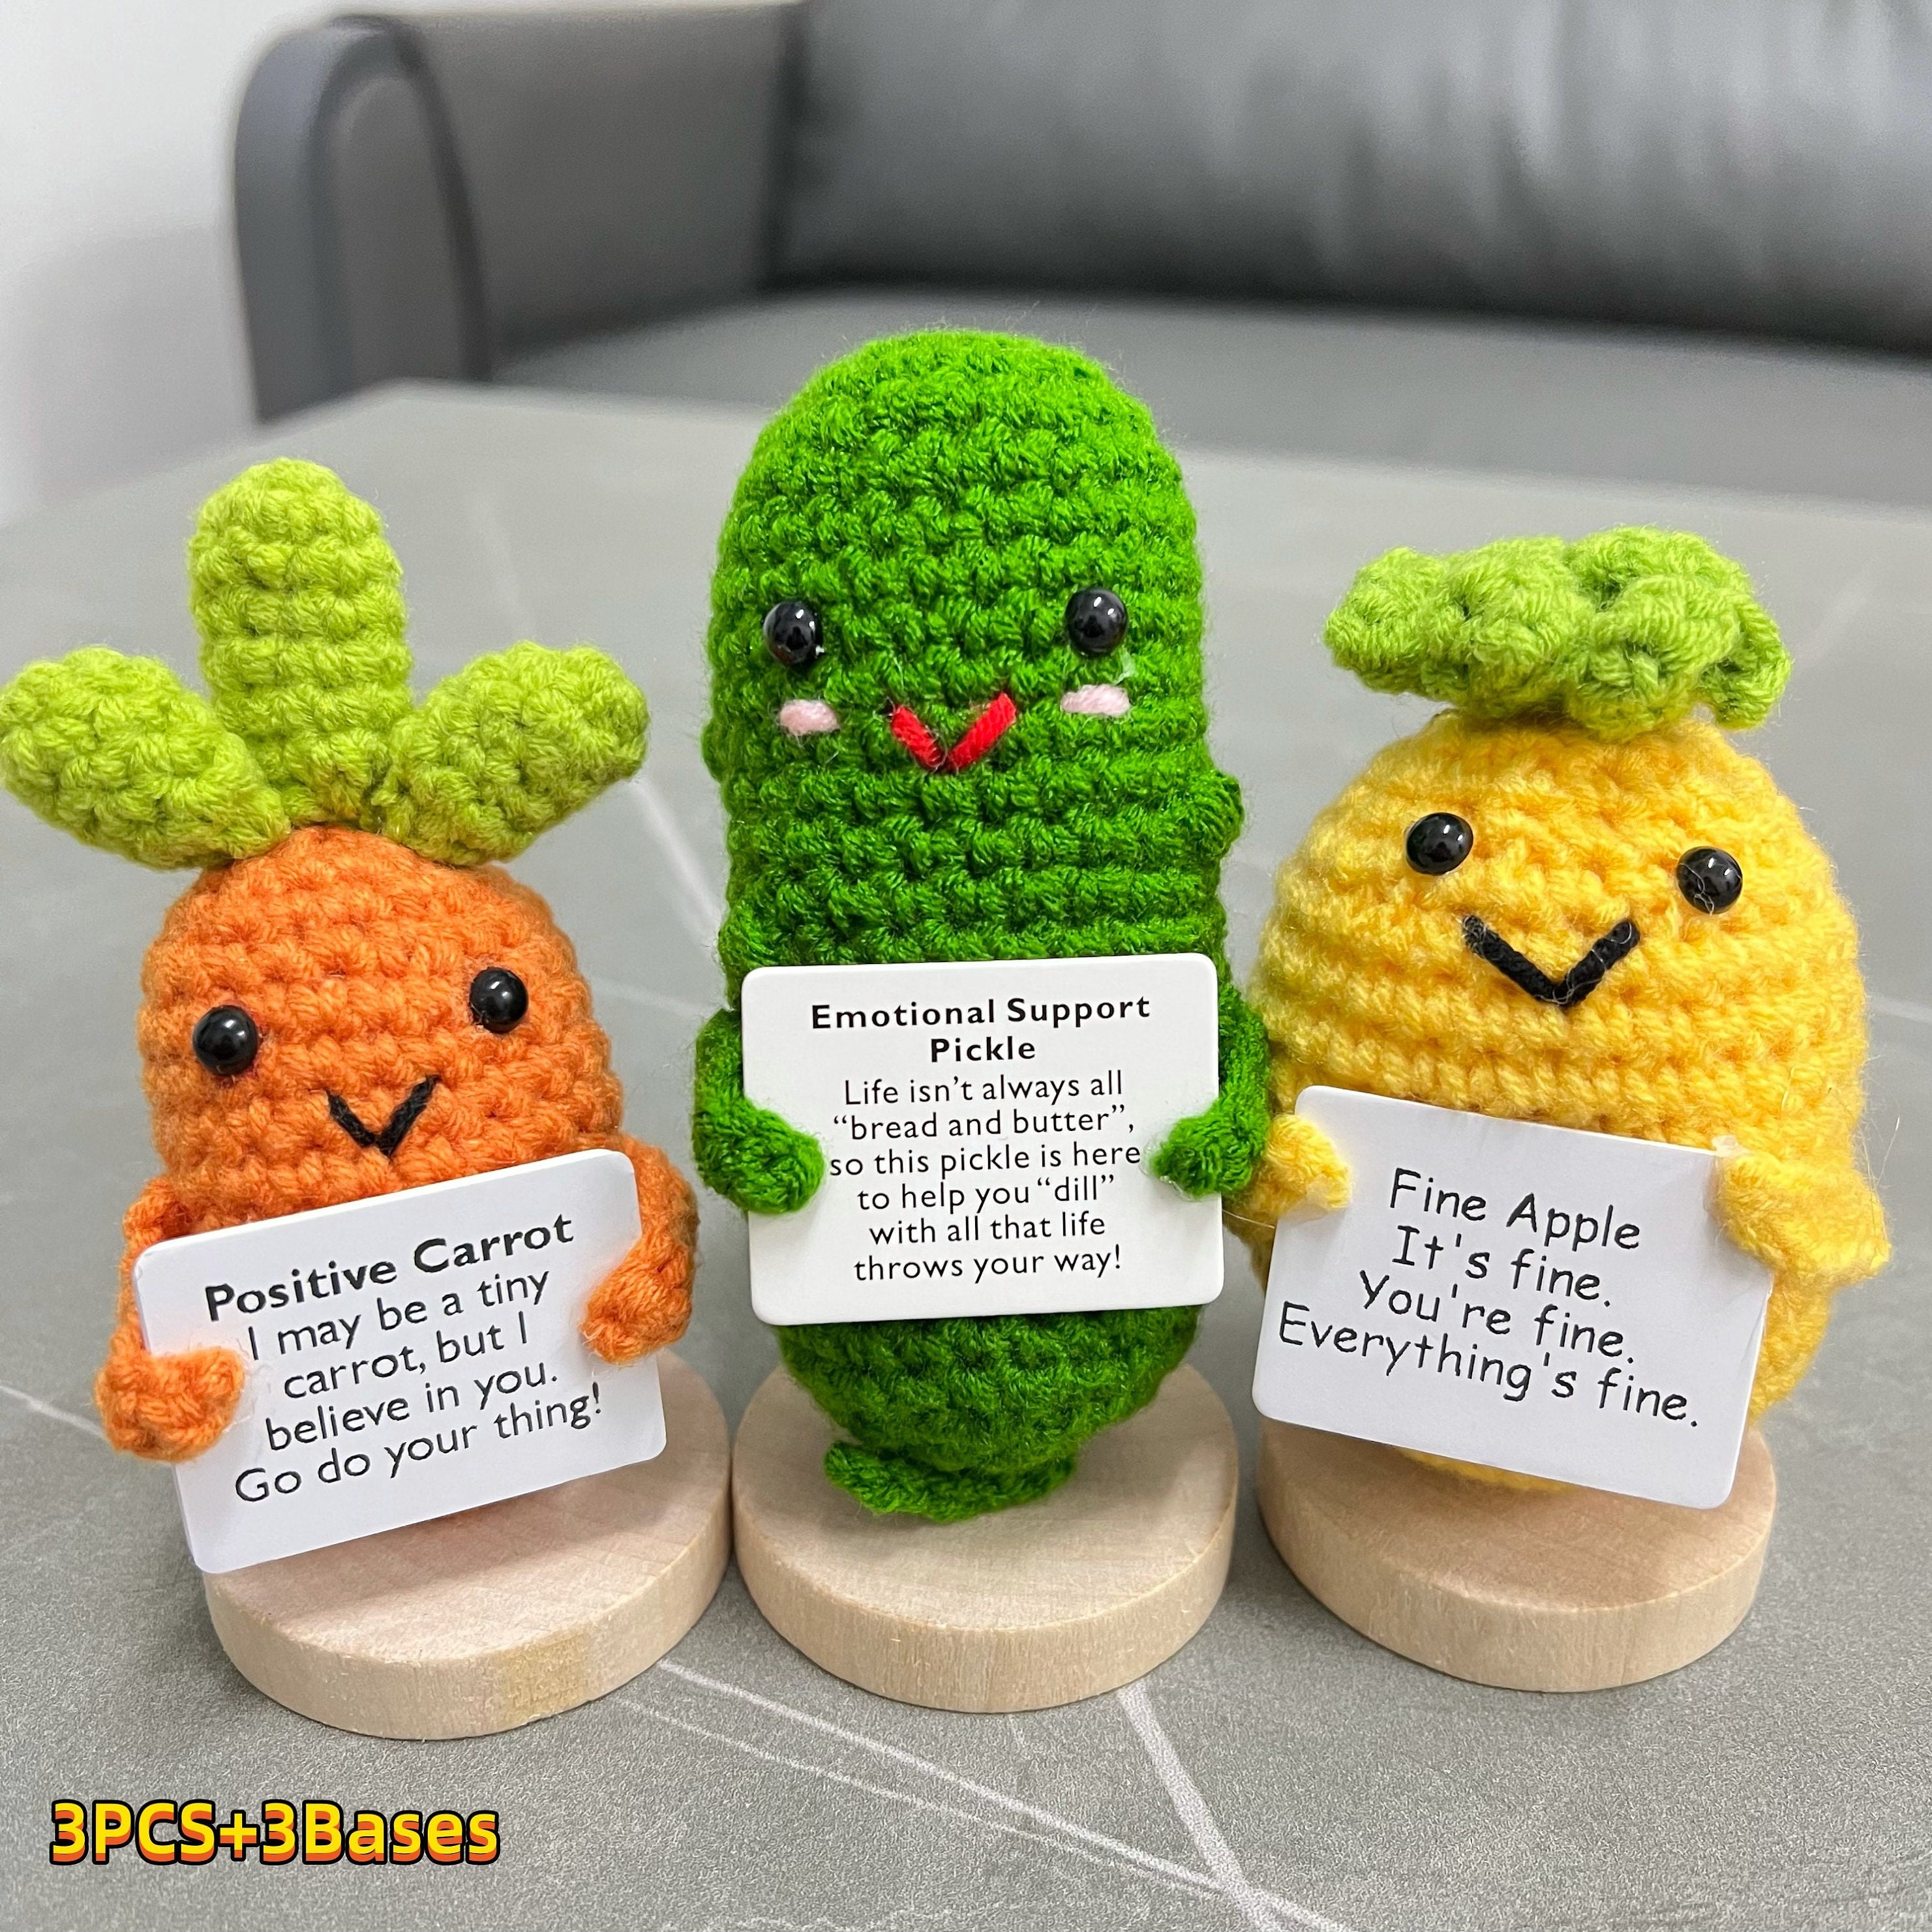 Handmade Emotional Support Pickle With Positive Affirmation